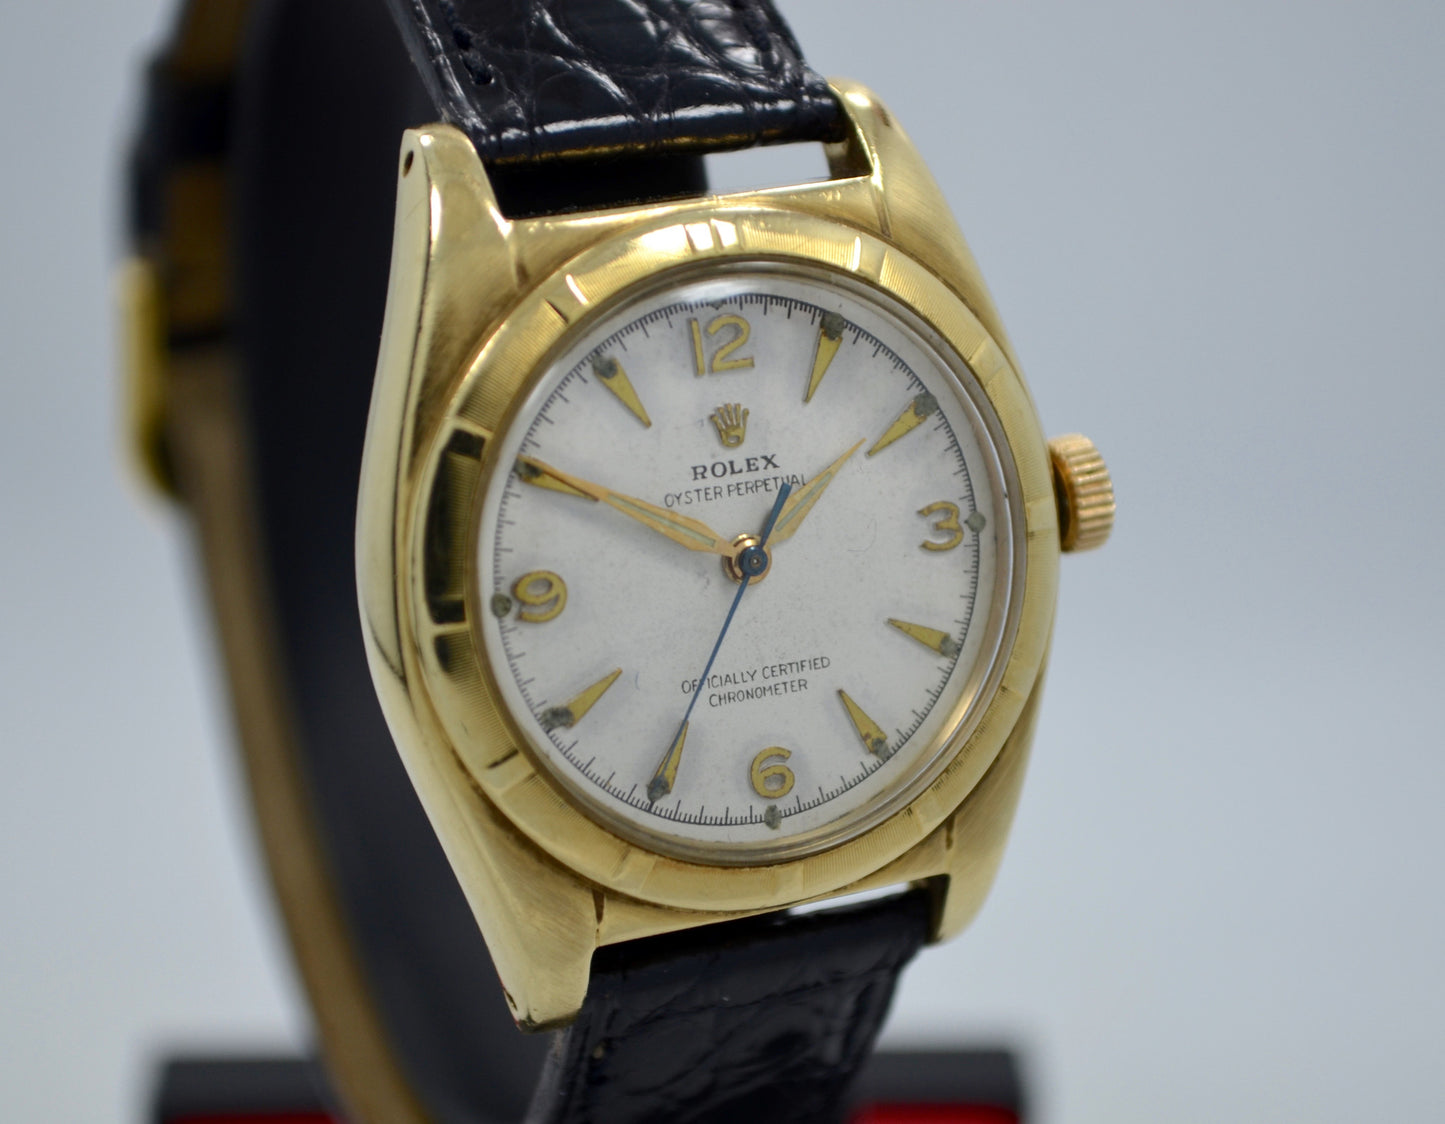 Vintage Rolex Bubbleback 6011 14K Solid Yellow Gold Steel Automatic Watch - Hashtag Watch Company